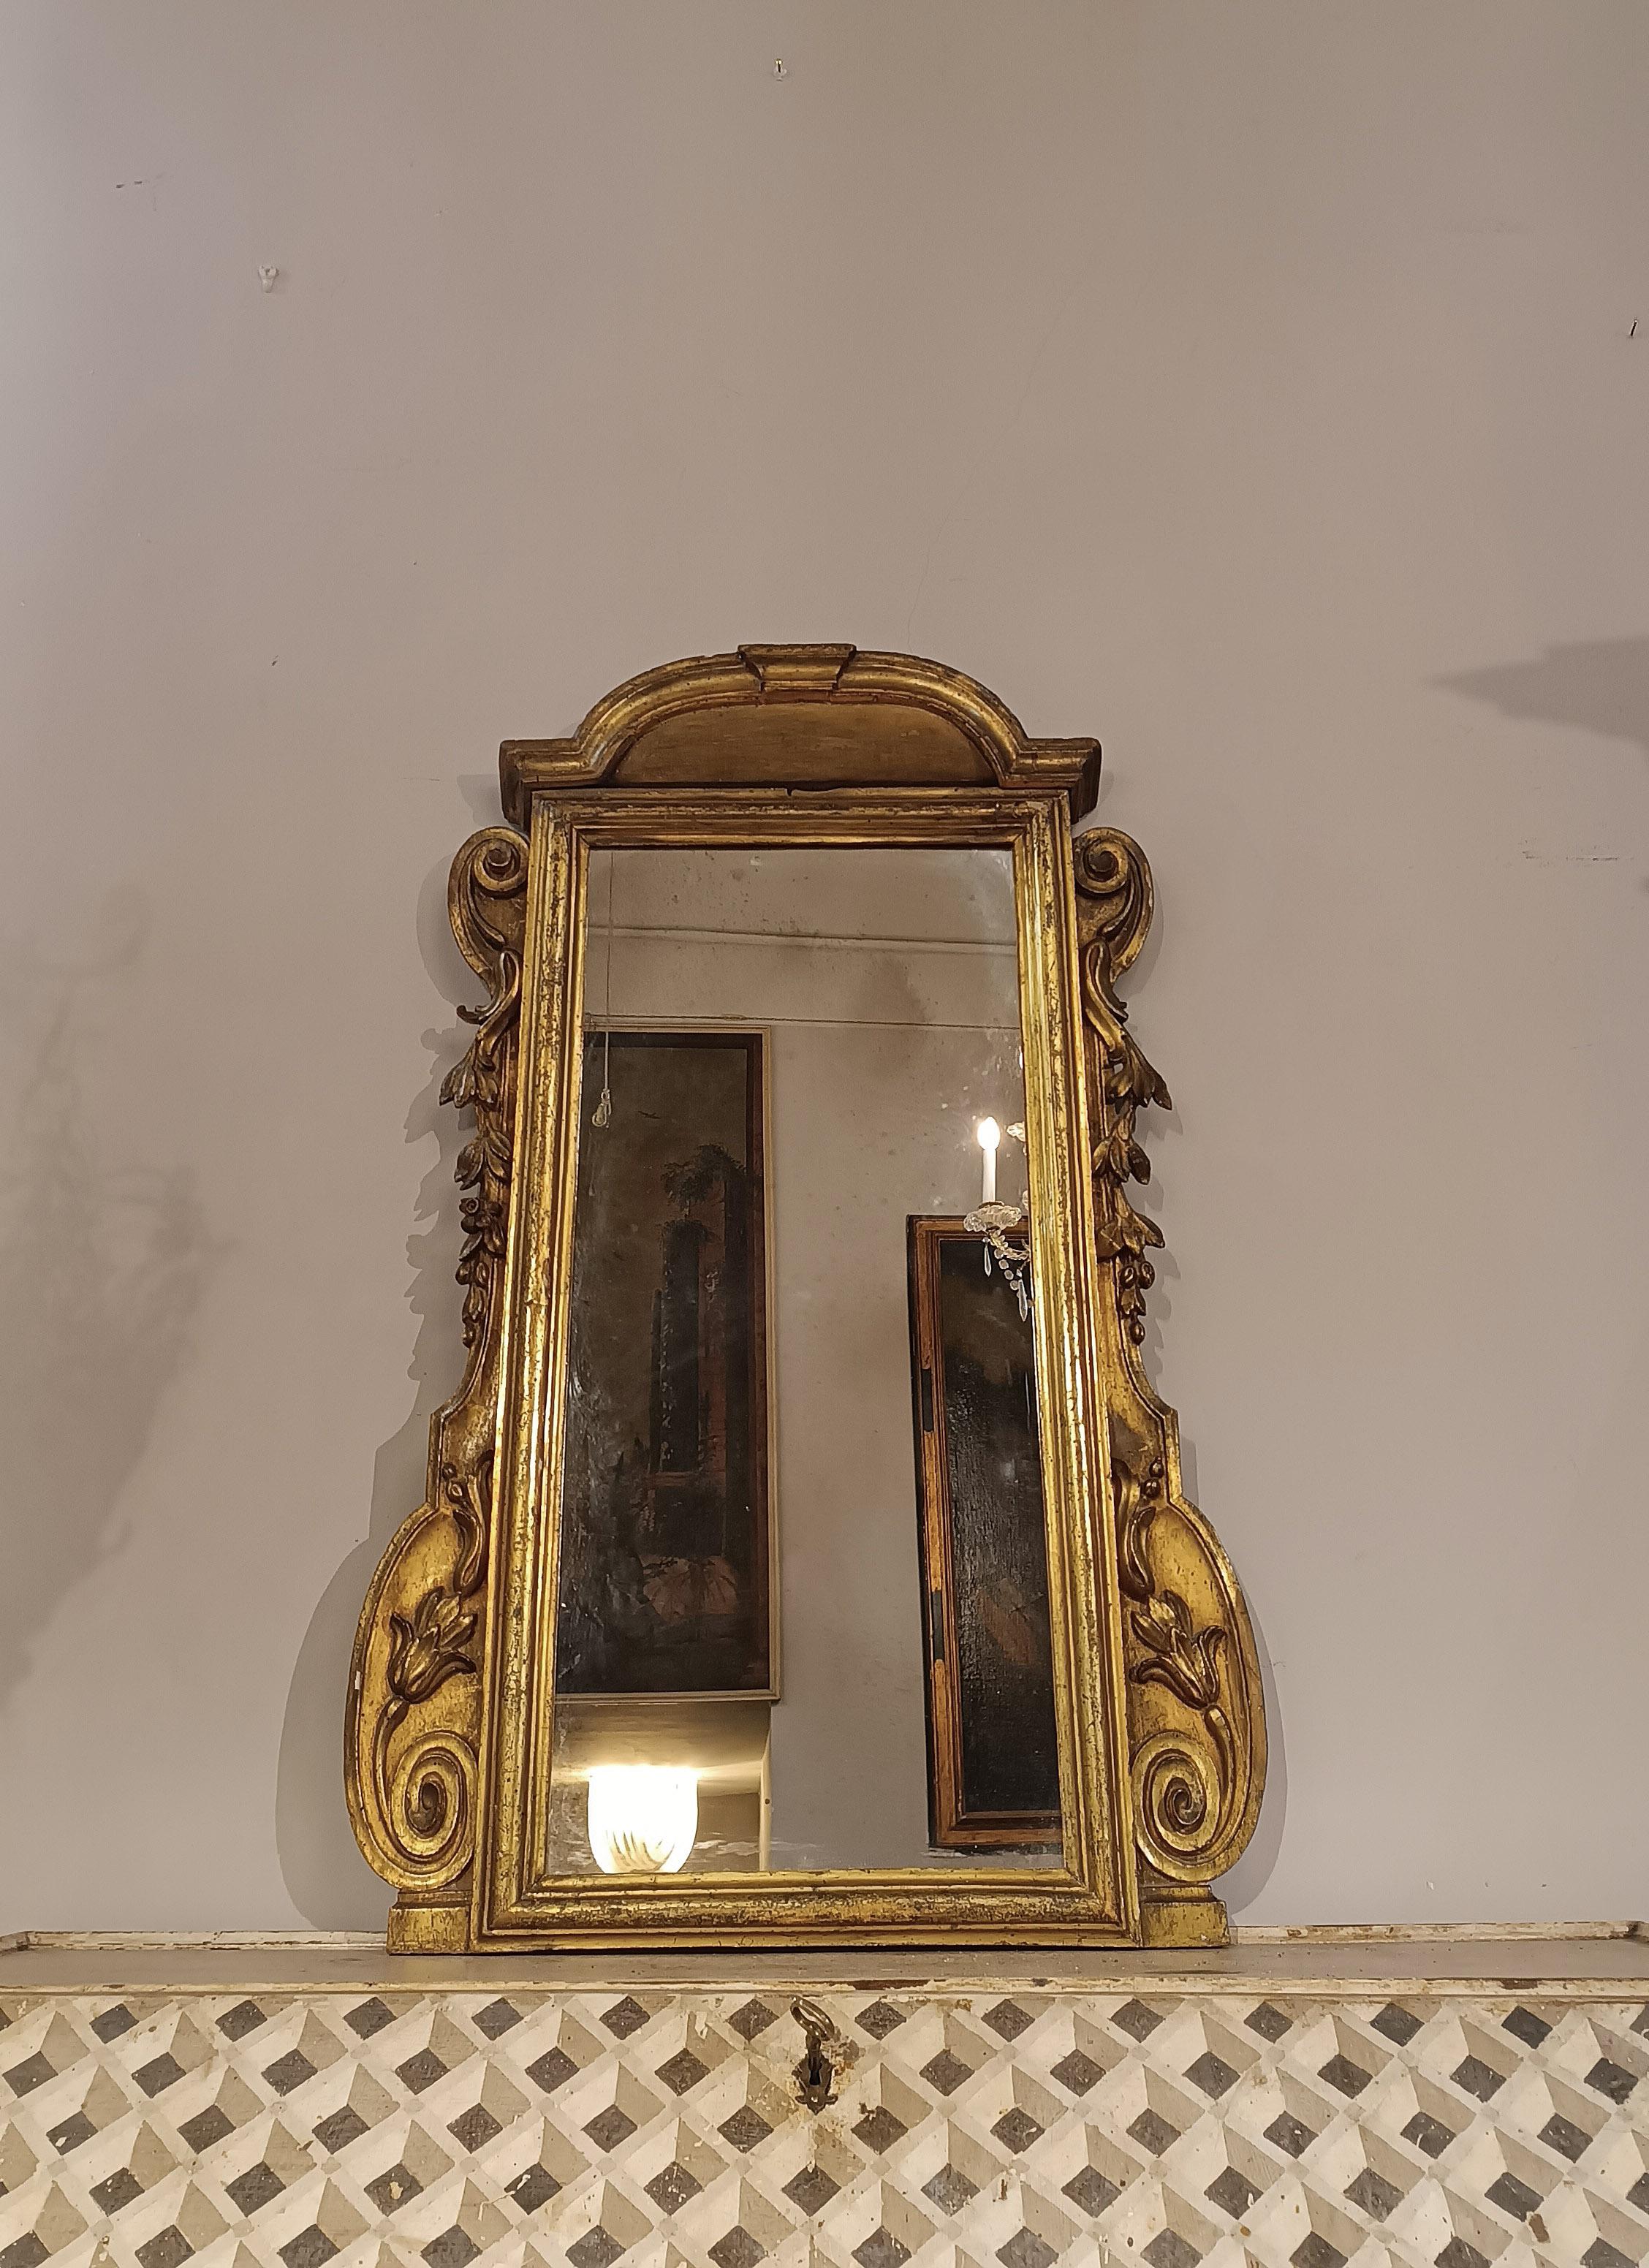 Fascinating small mirror in carved and mecha-gilded wood, characterized by a frame decorated with scrolls and vegetal elements. The cymatium, an architectural substructure and corbel, also adds further charm. Its small size makes it suitable for any